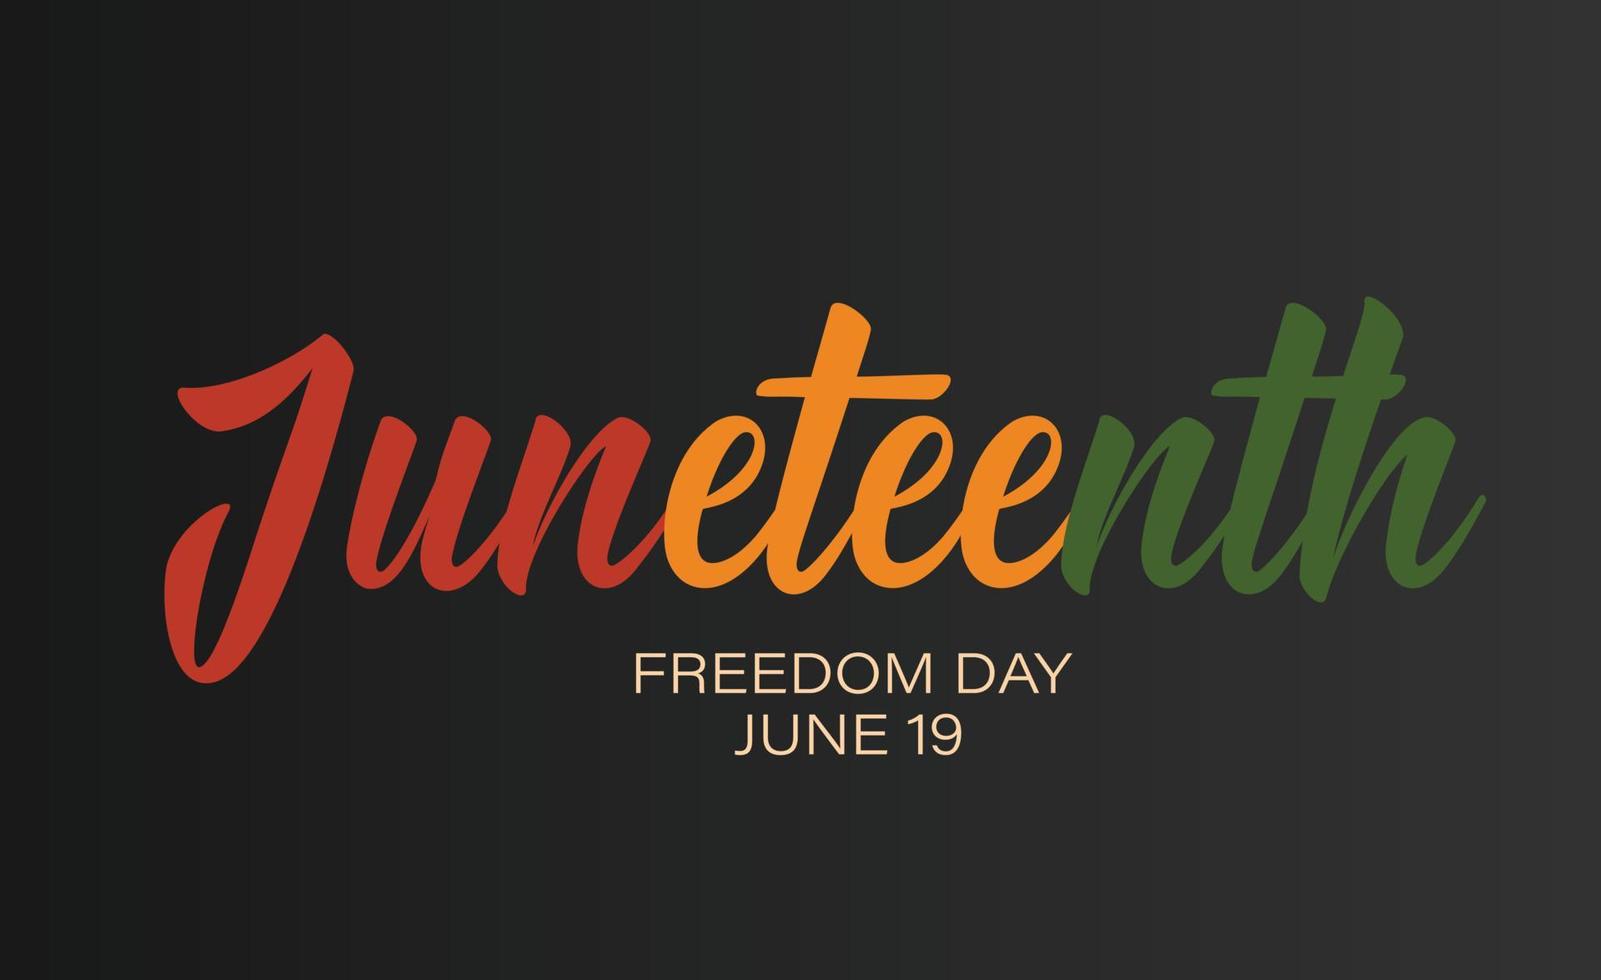 Minimalist Juneteenth horizontal banner design. Vector template for Juneteenth Freedom day with text logo. Celebration in USA